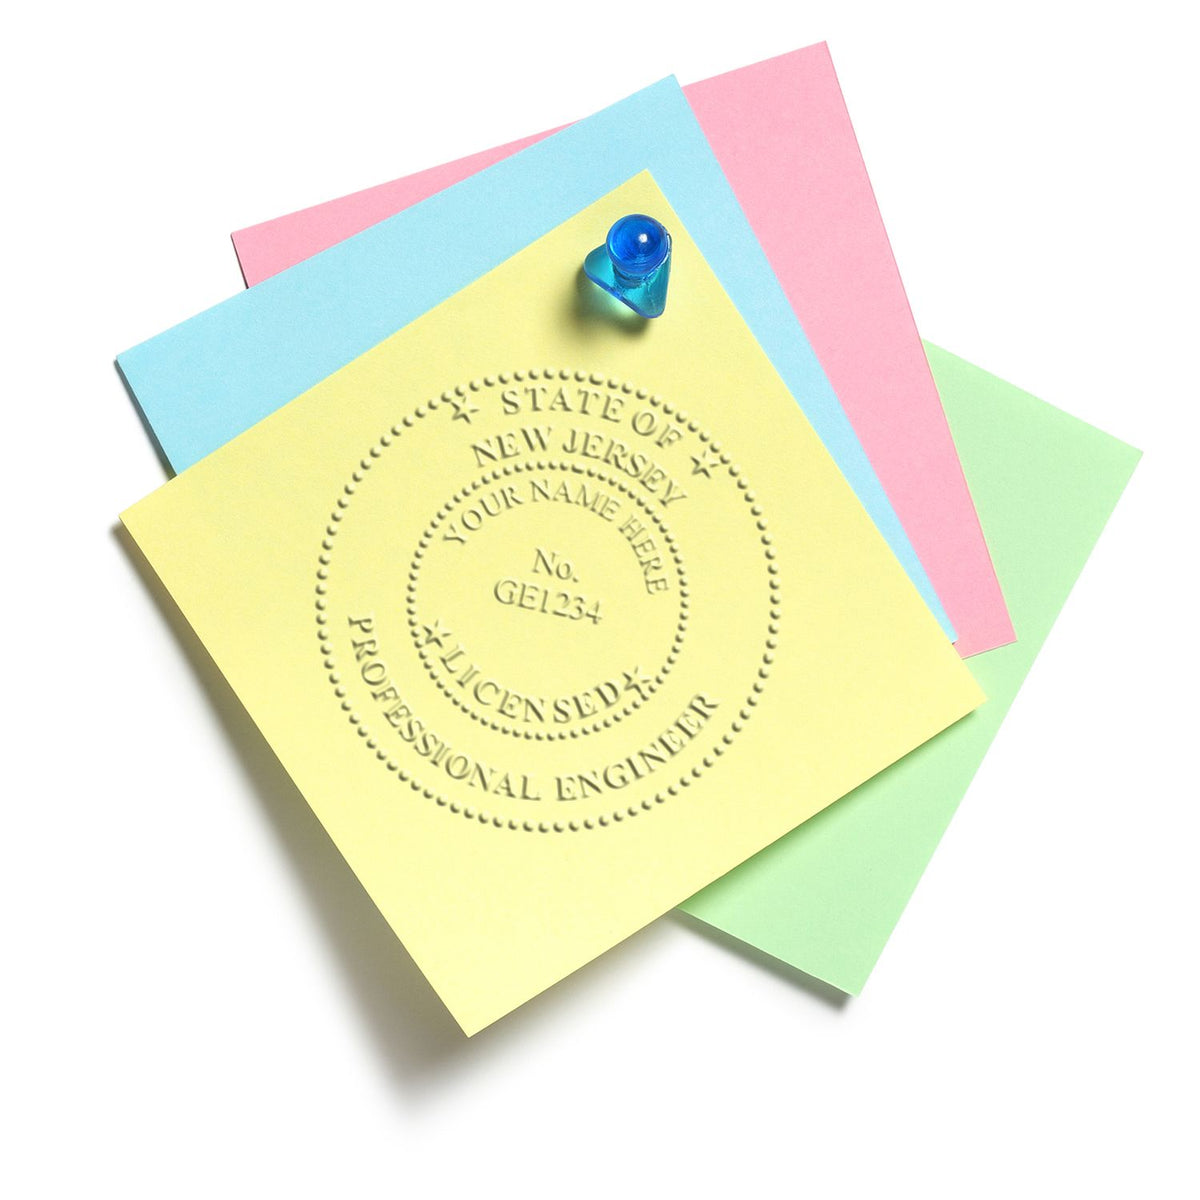 An in use photo of the Gift New Jersey Engineer Seal showing a sample imprint on a cardstock